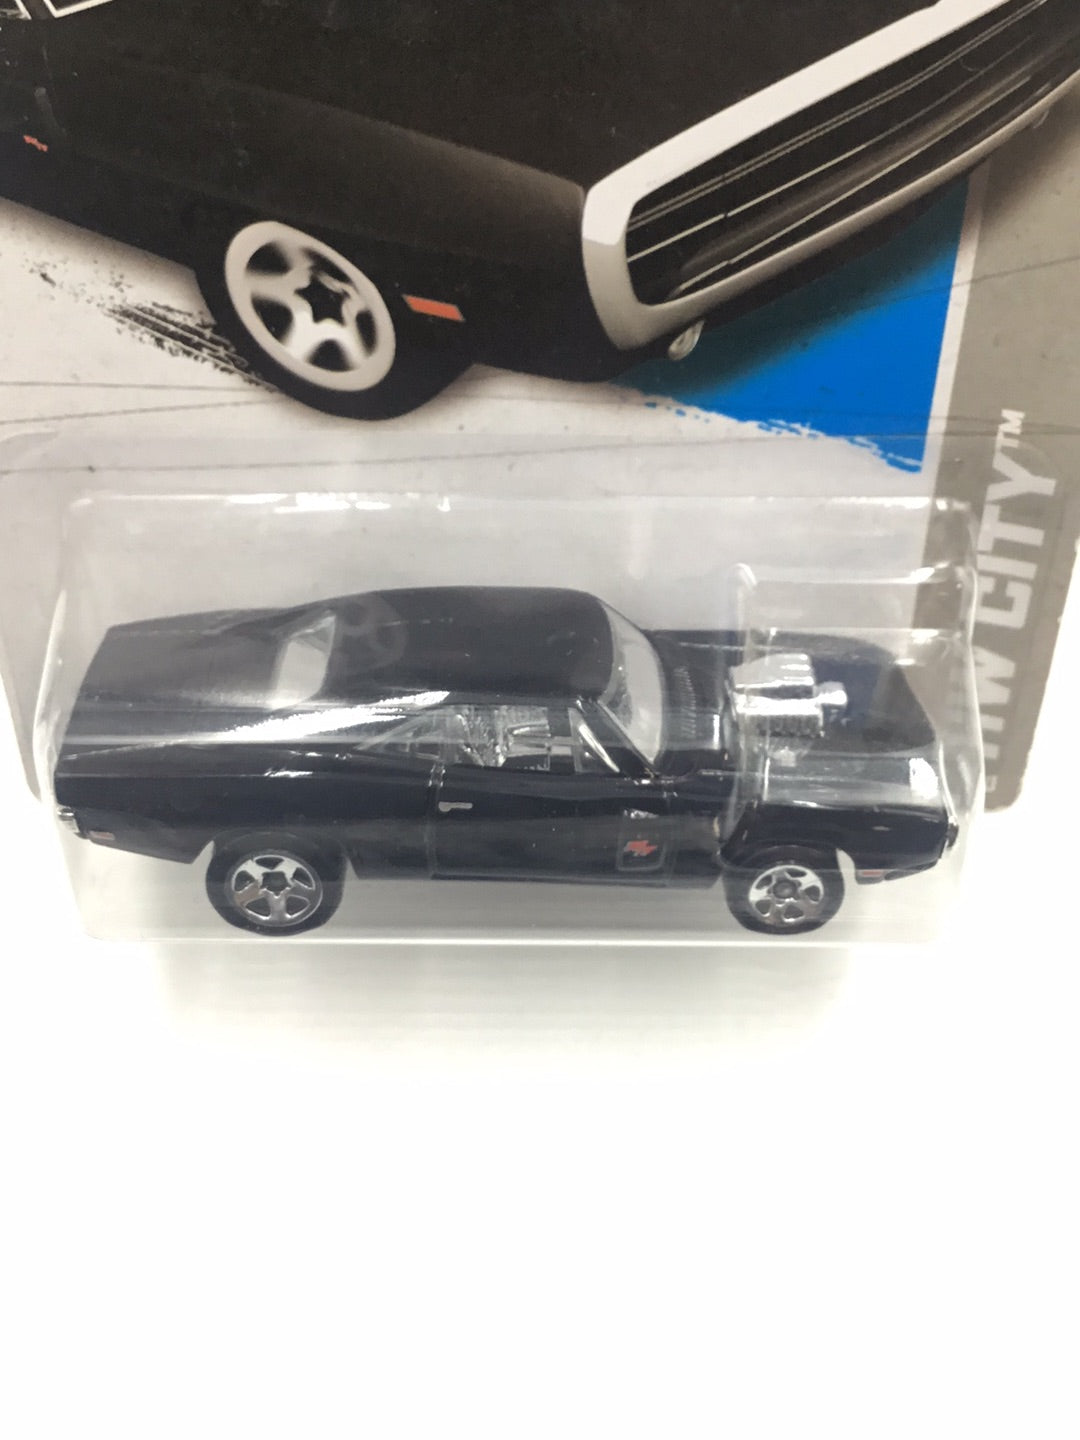 2013 Hot wheels fast and furious #3 70 Dodge Charger R/T with protector